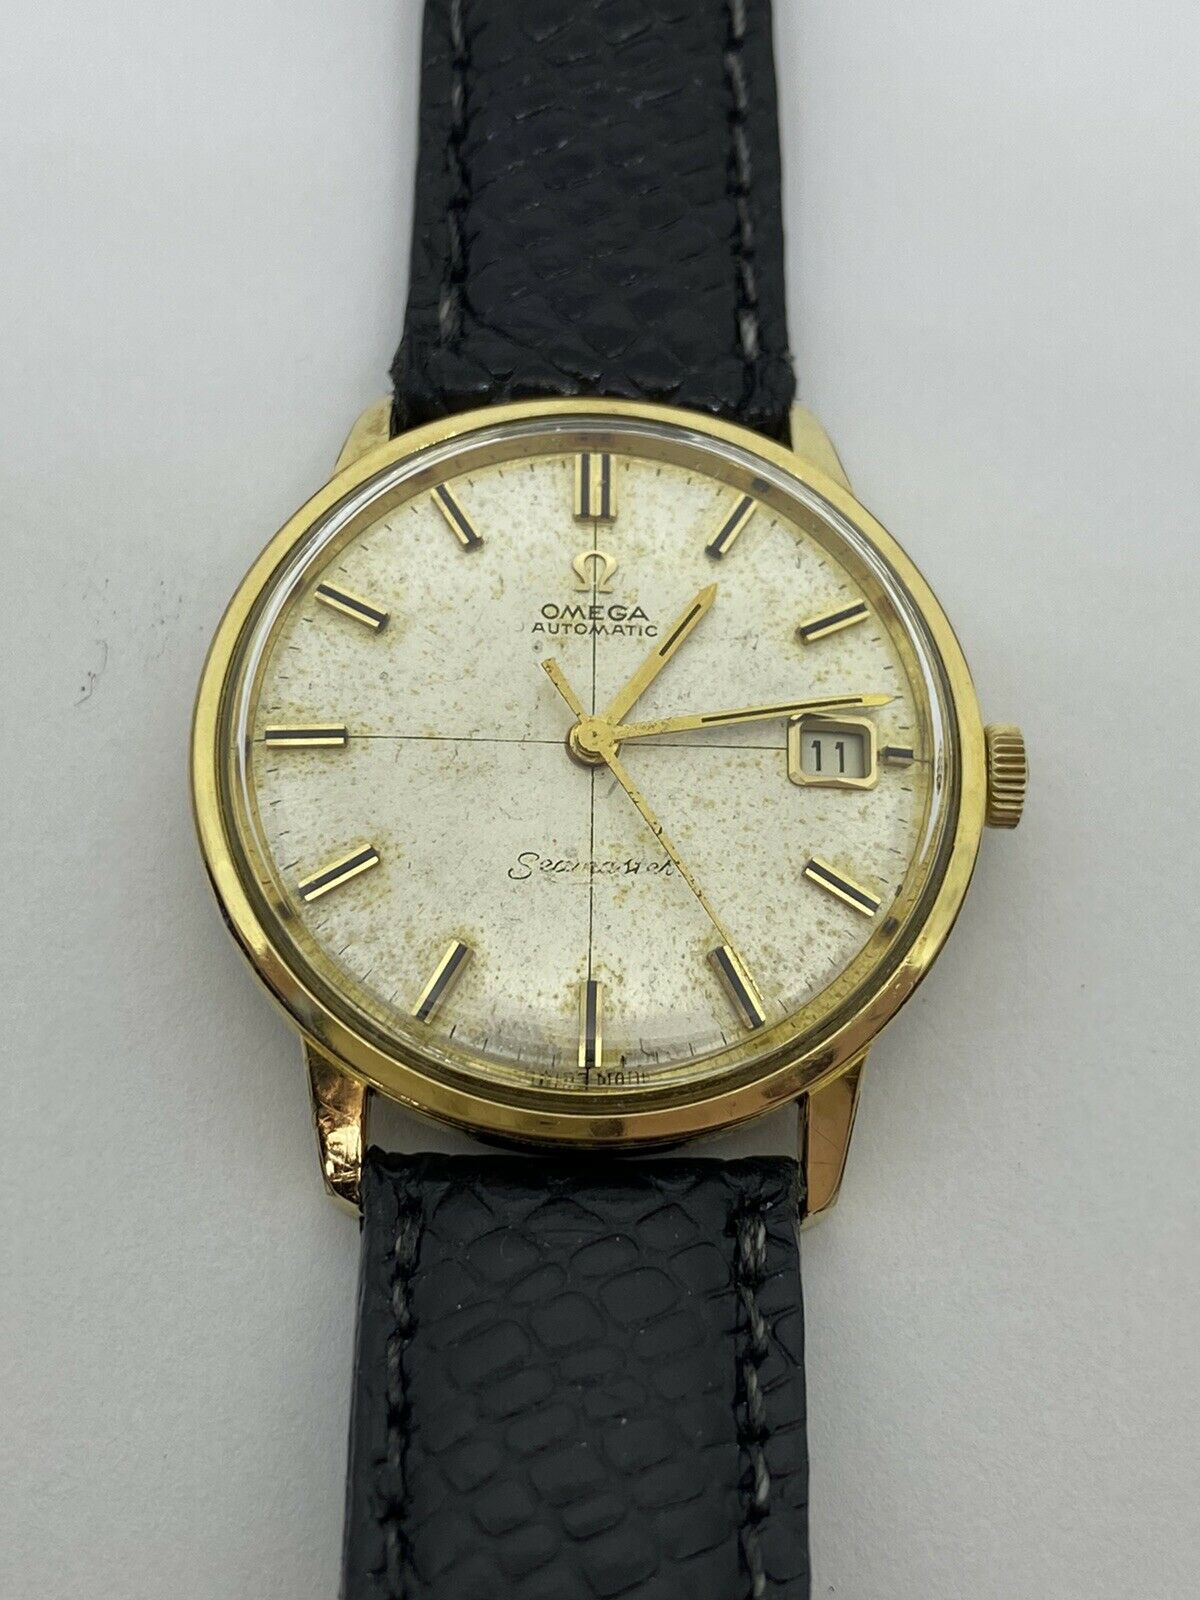 Vintage Omega Seamaster Date Cross Dial 166.001 Cal 562 34mm